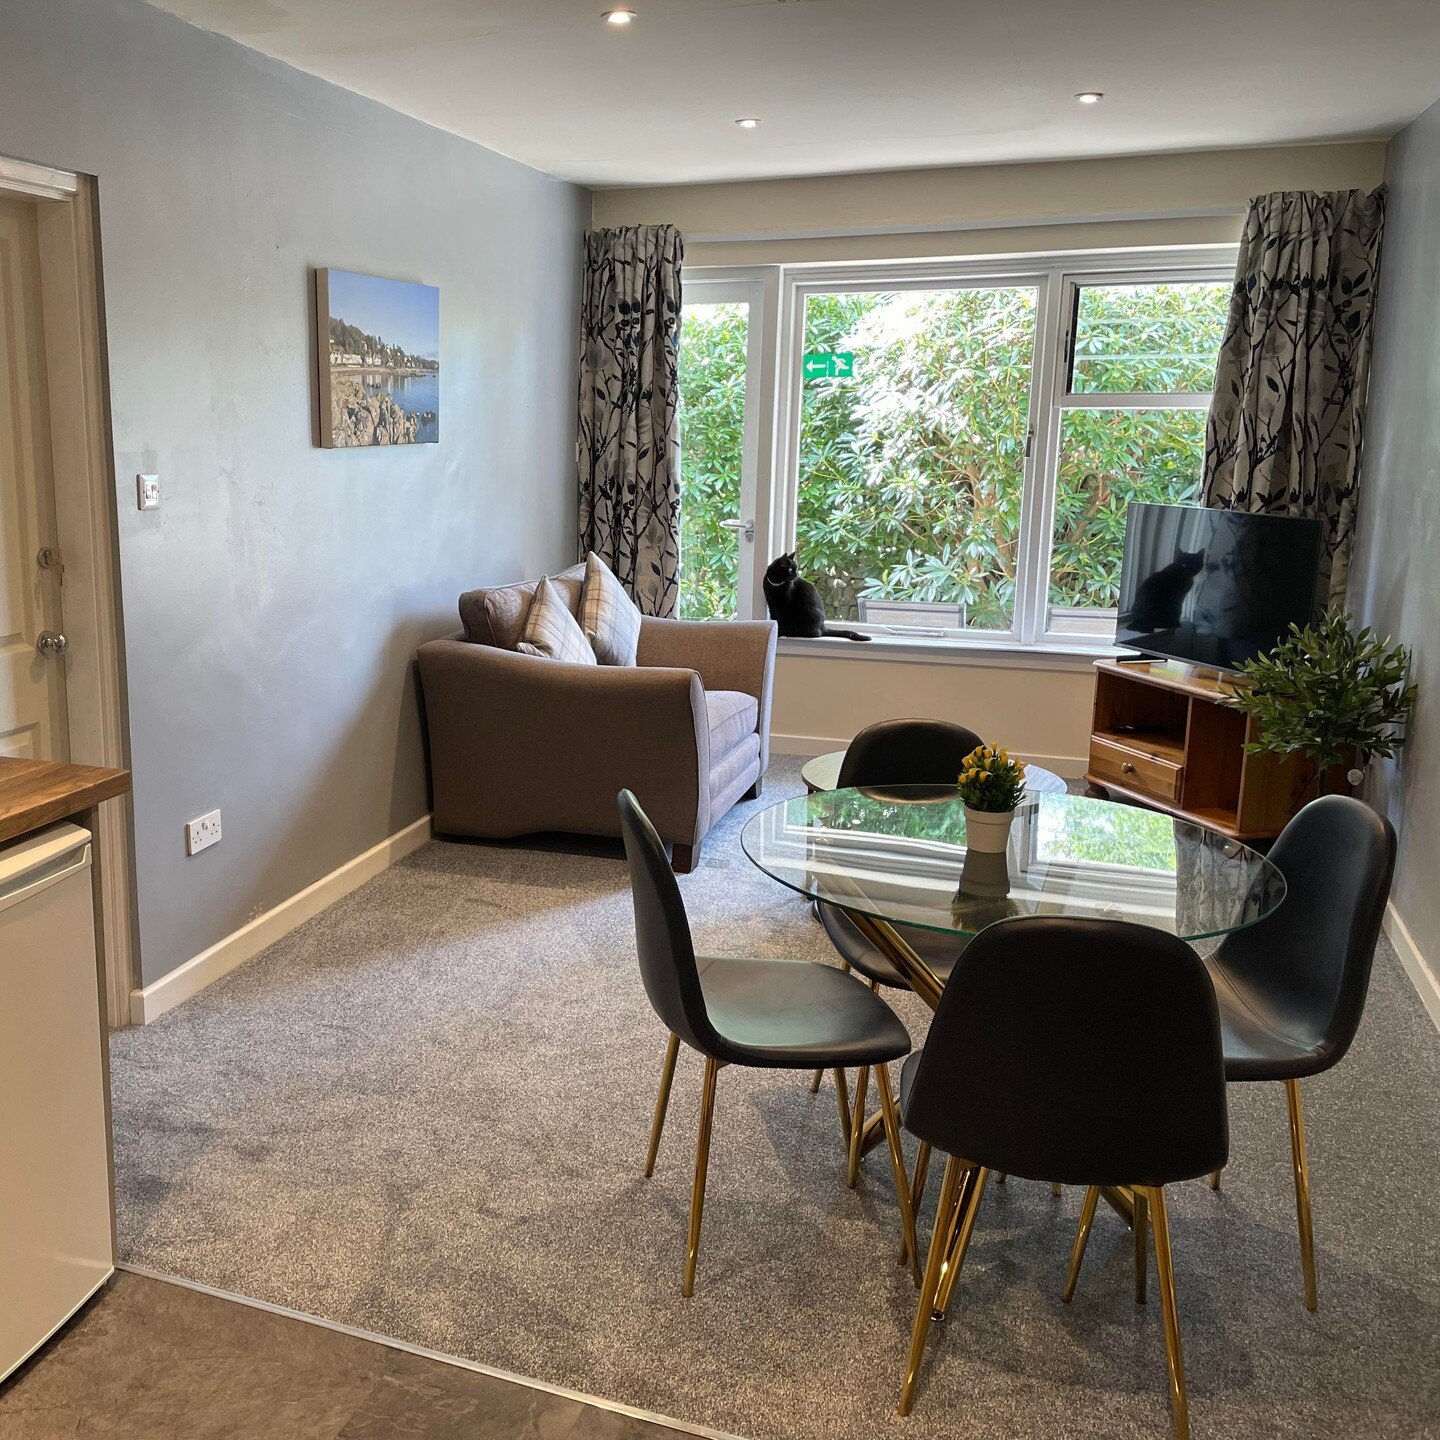 We are excited to launch our new self-catering apartment. It has everything you need for a weekend escape from the city.
#weekendescape #dalbeattie #kippford #solwaycoast